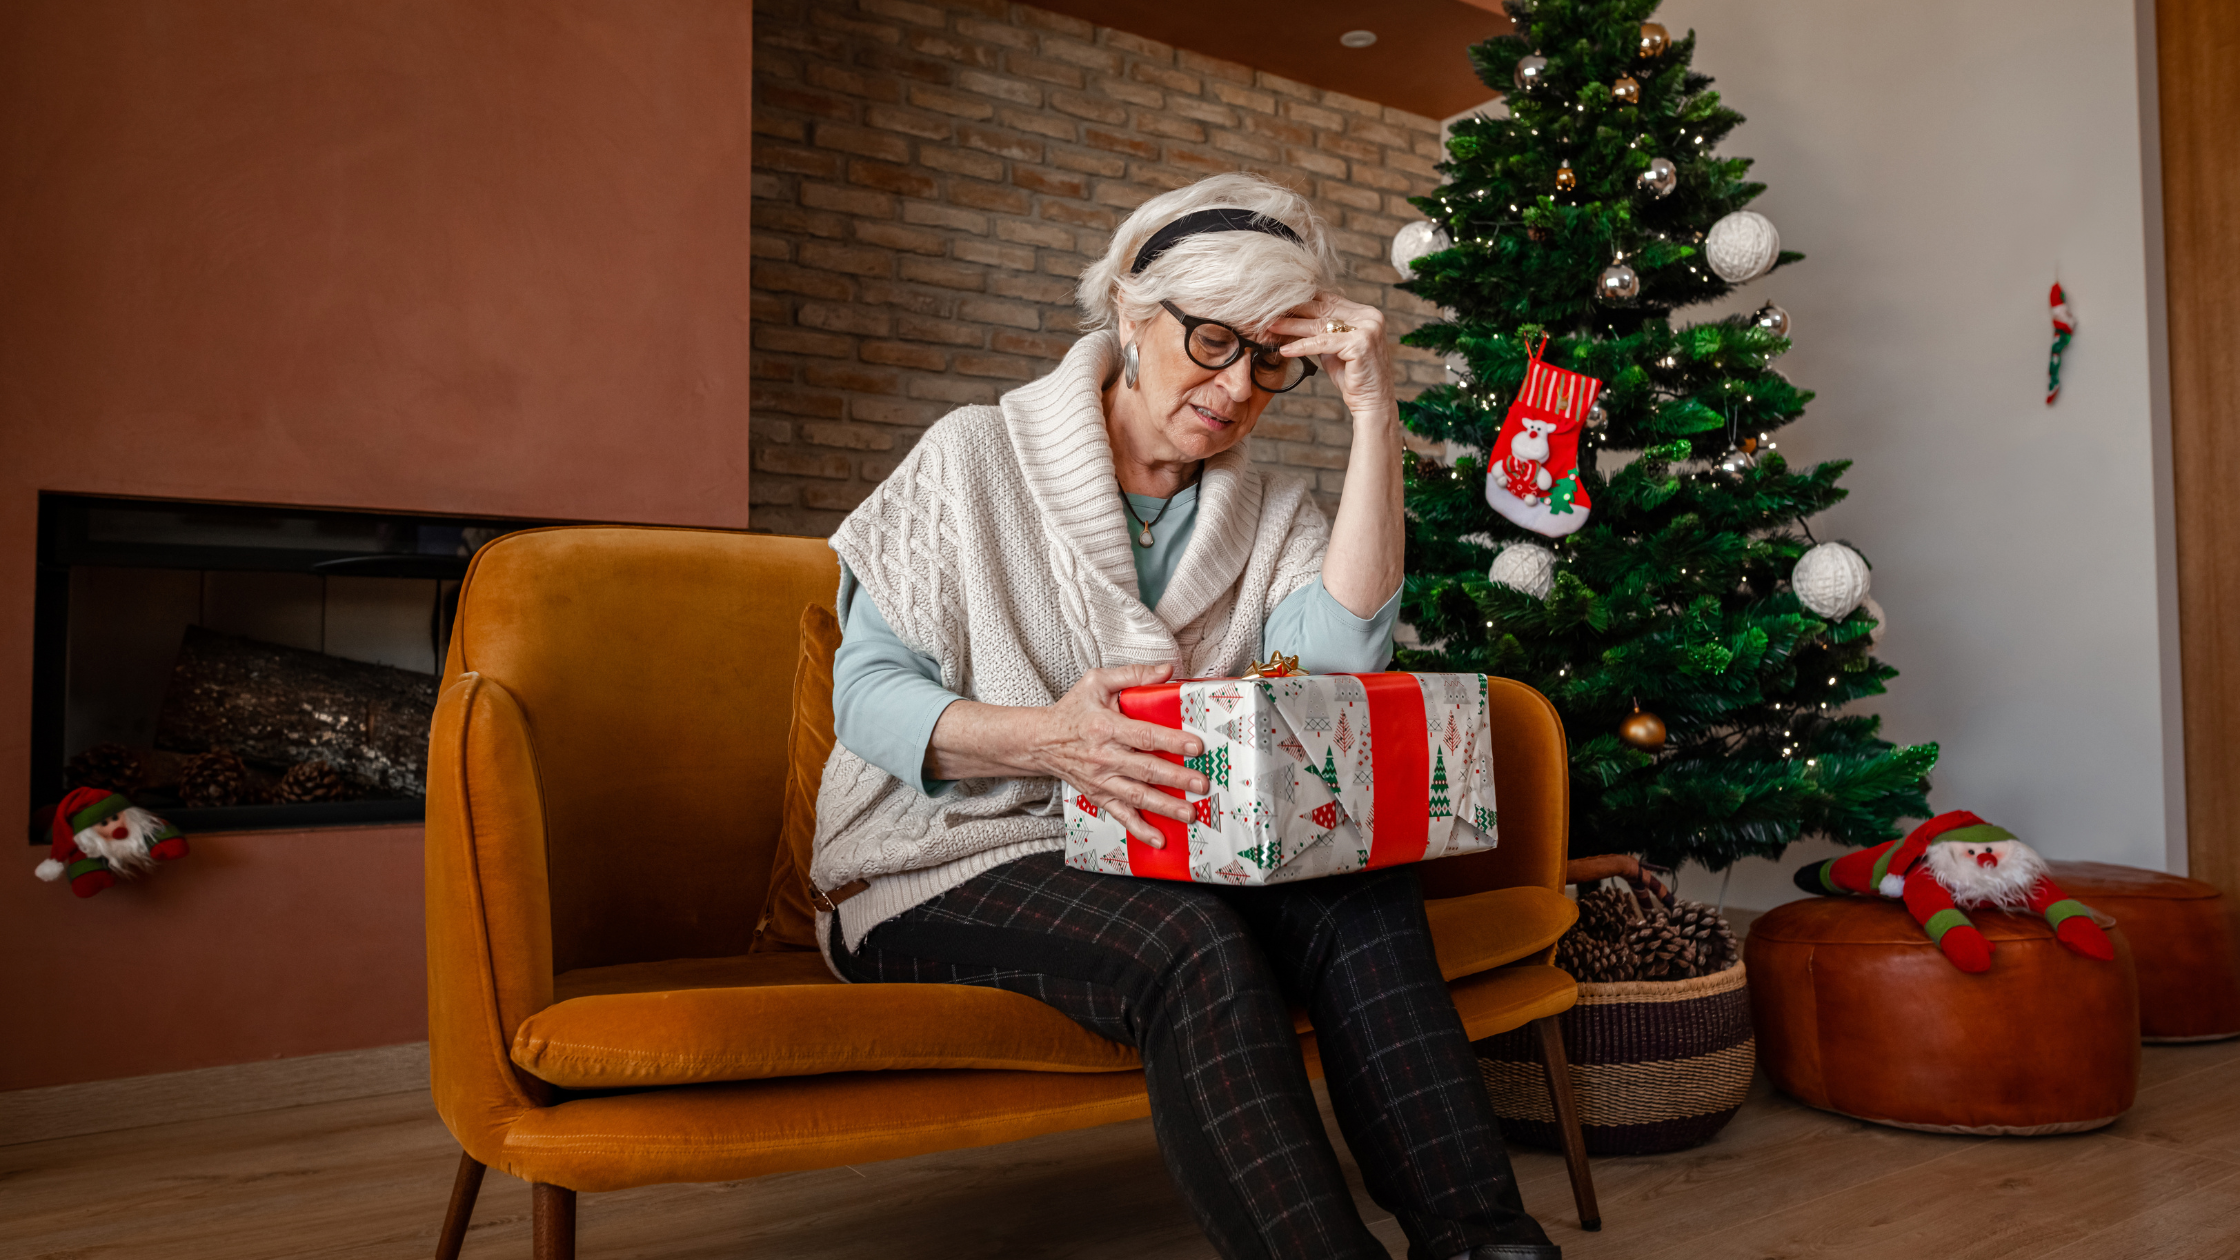 senior looks pensively at a wrapped present in their lap